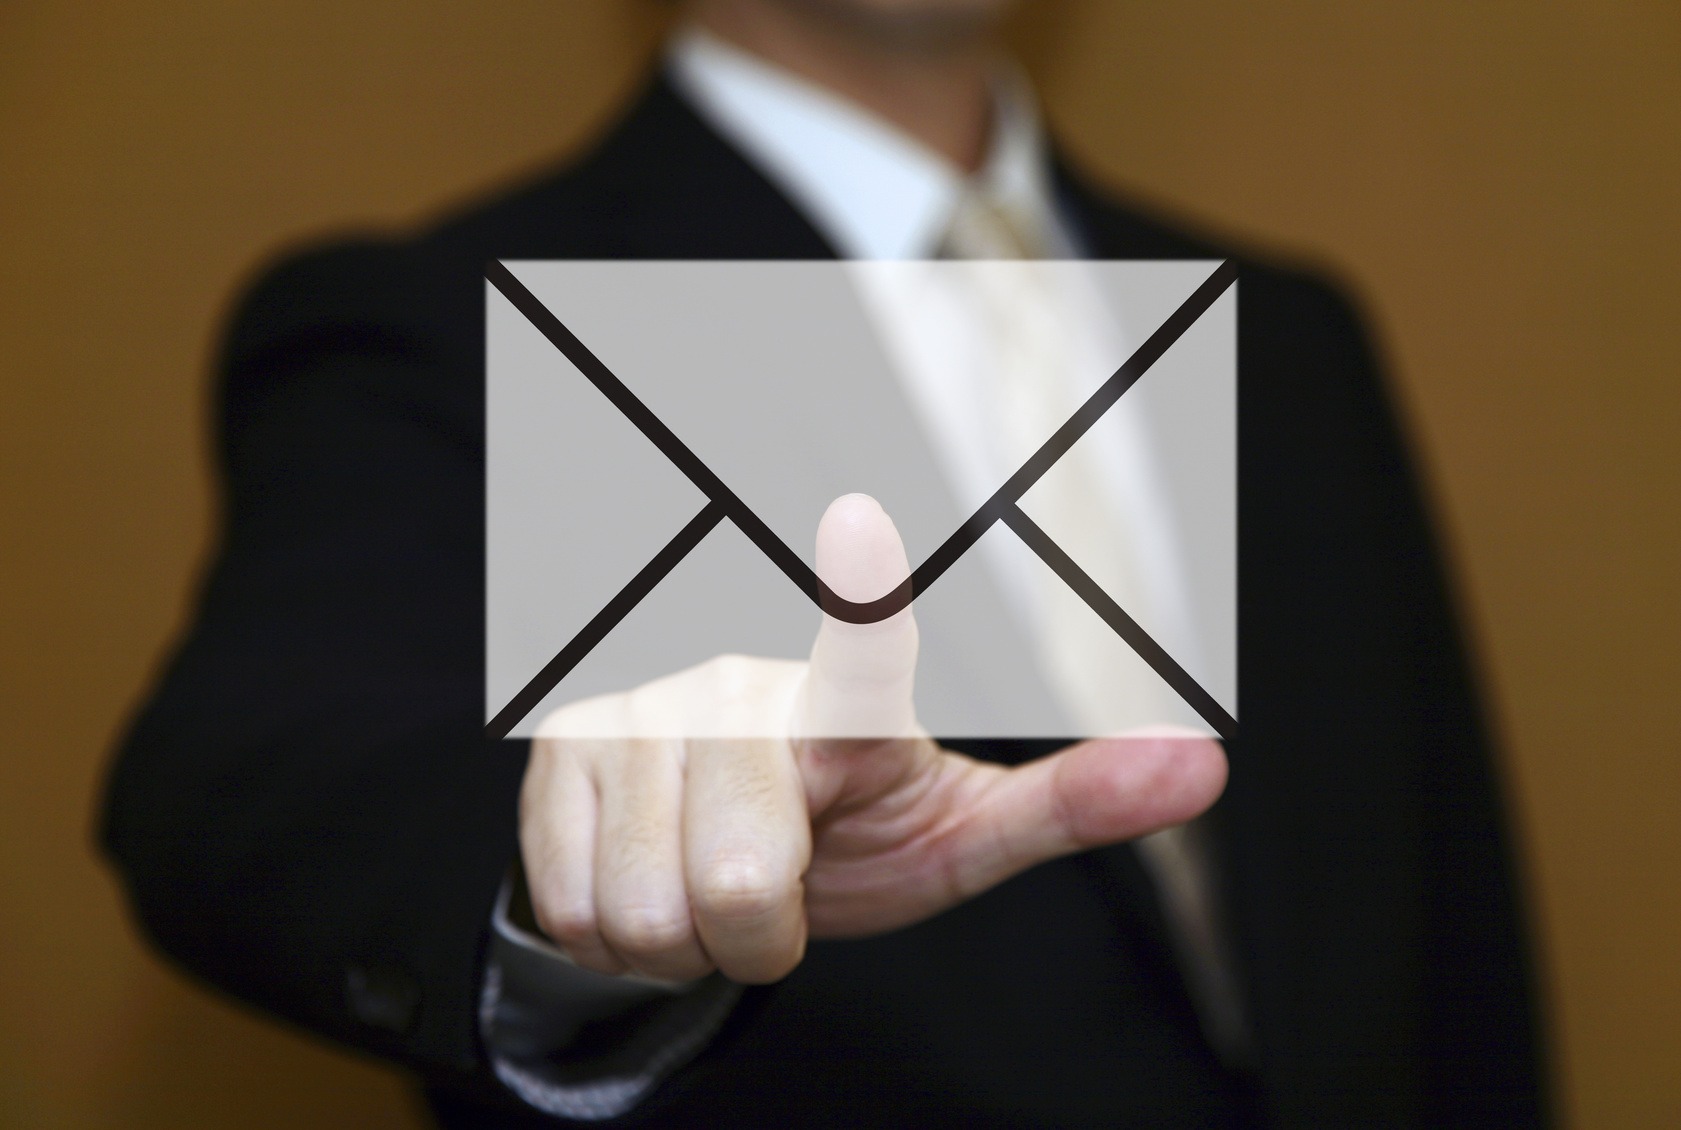 38 Things You Need To Know About E-mail: Part 3